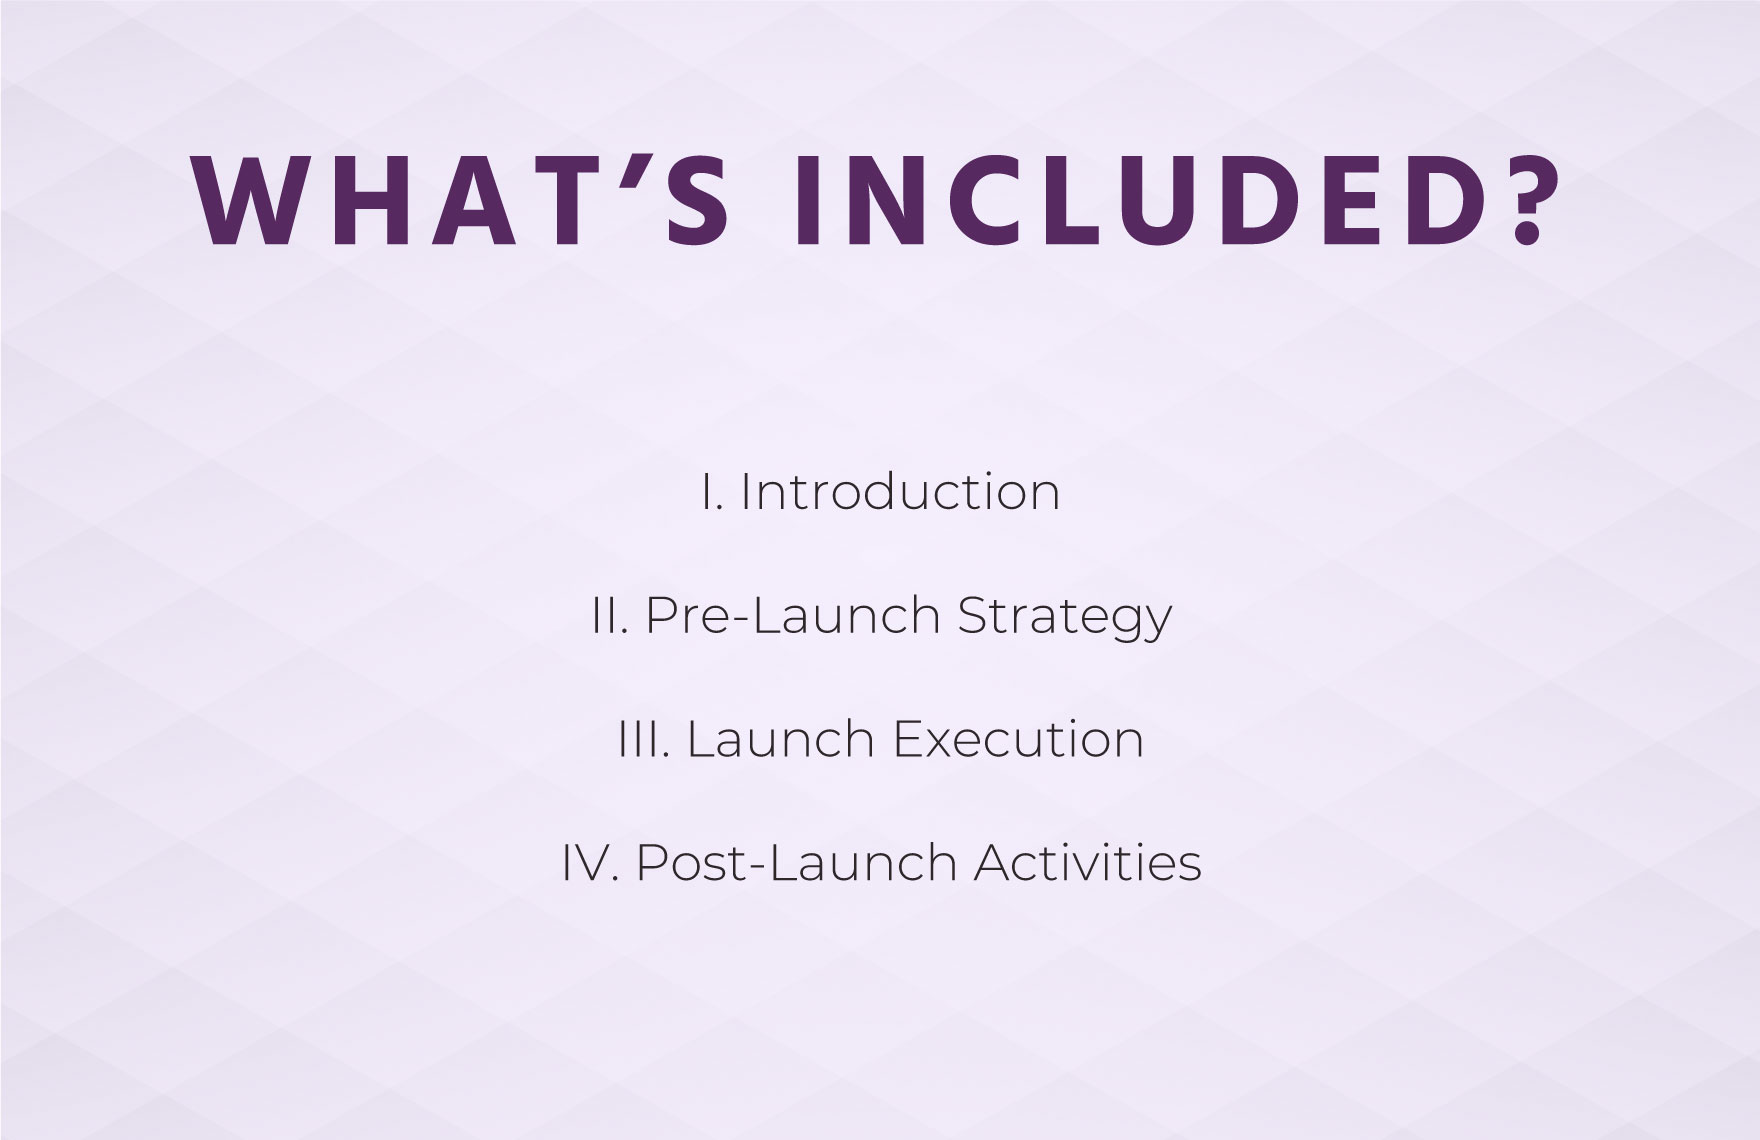 Marketing Product Launch Plan Template